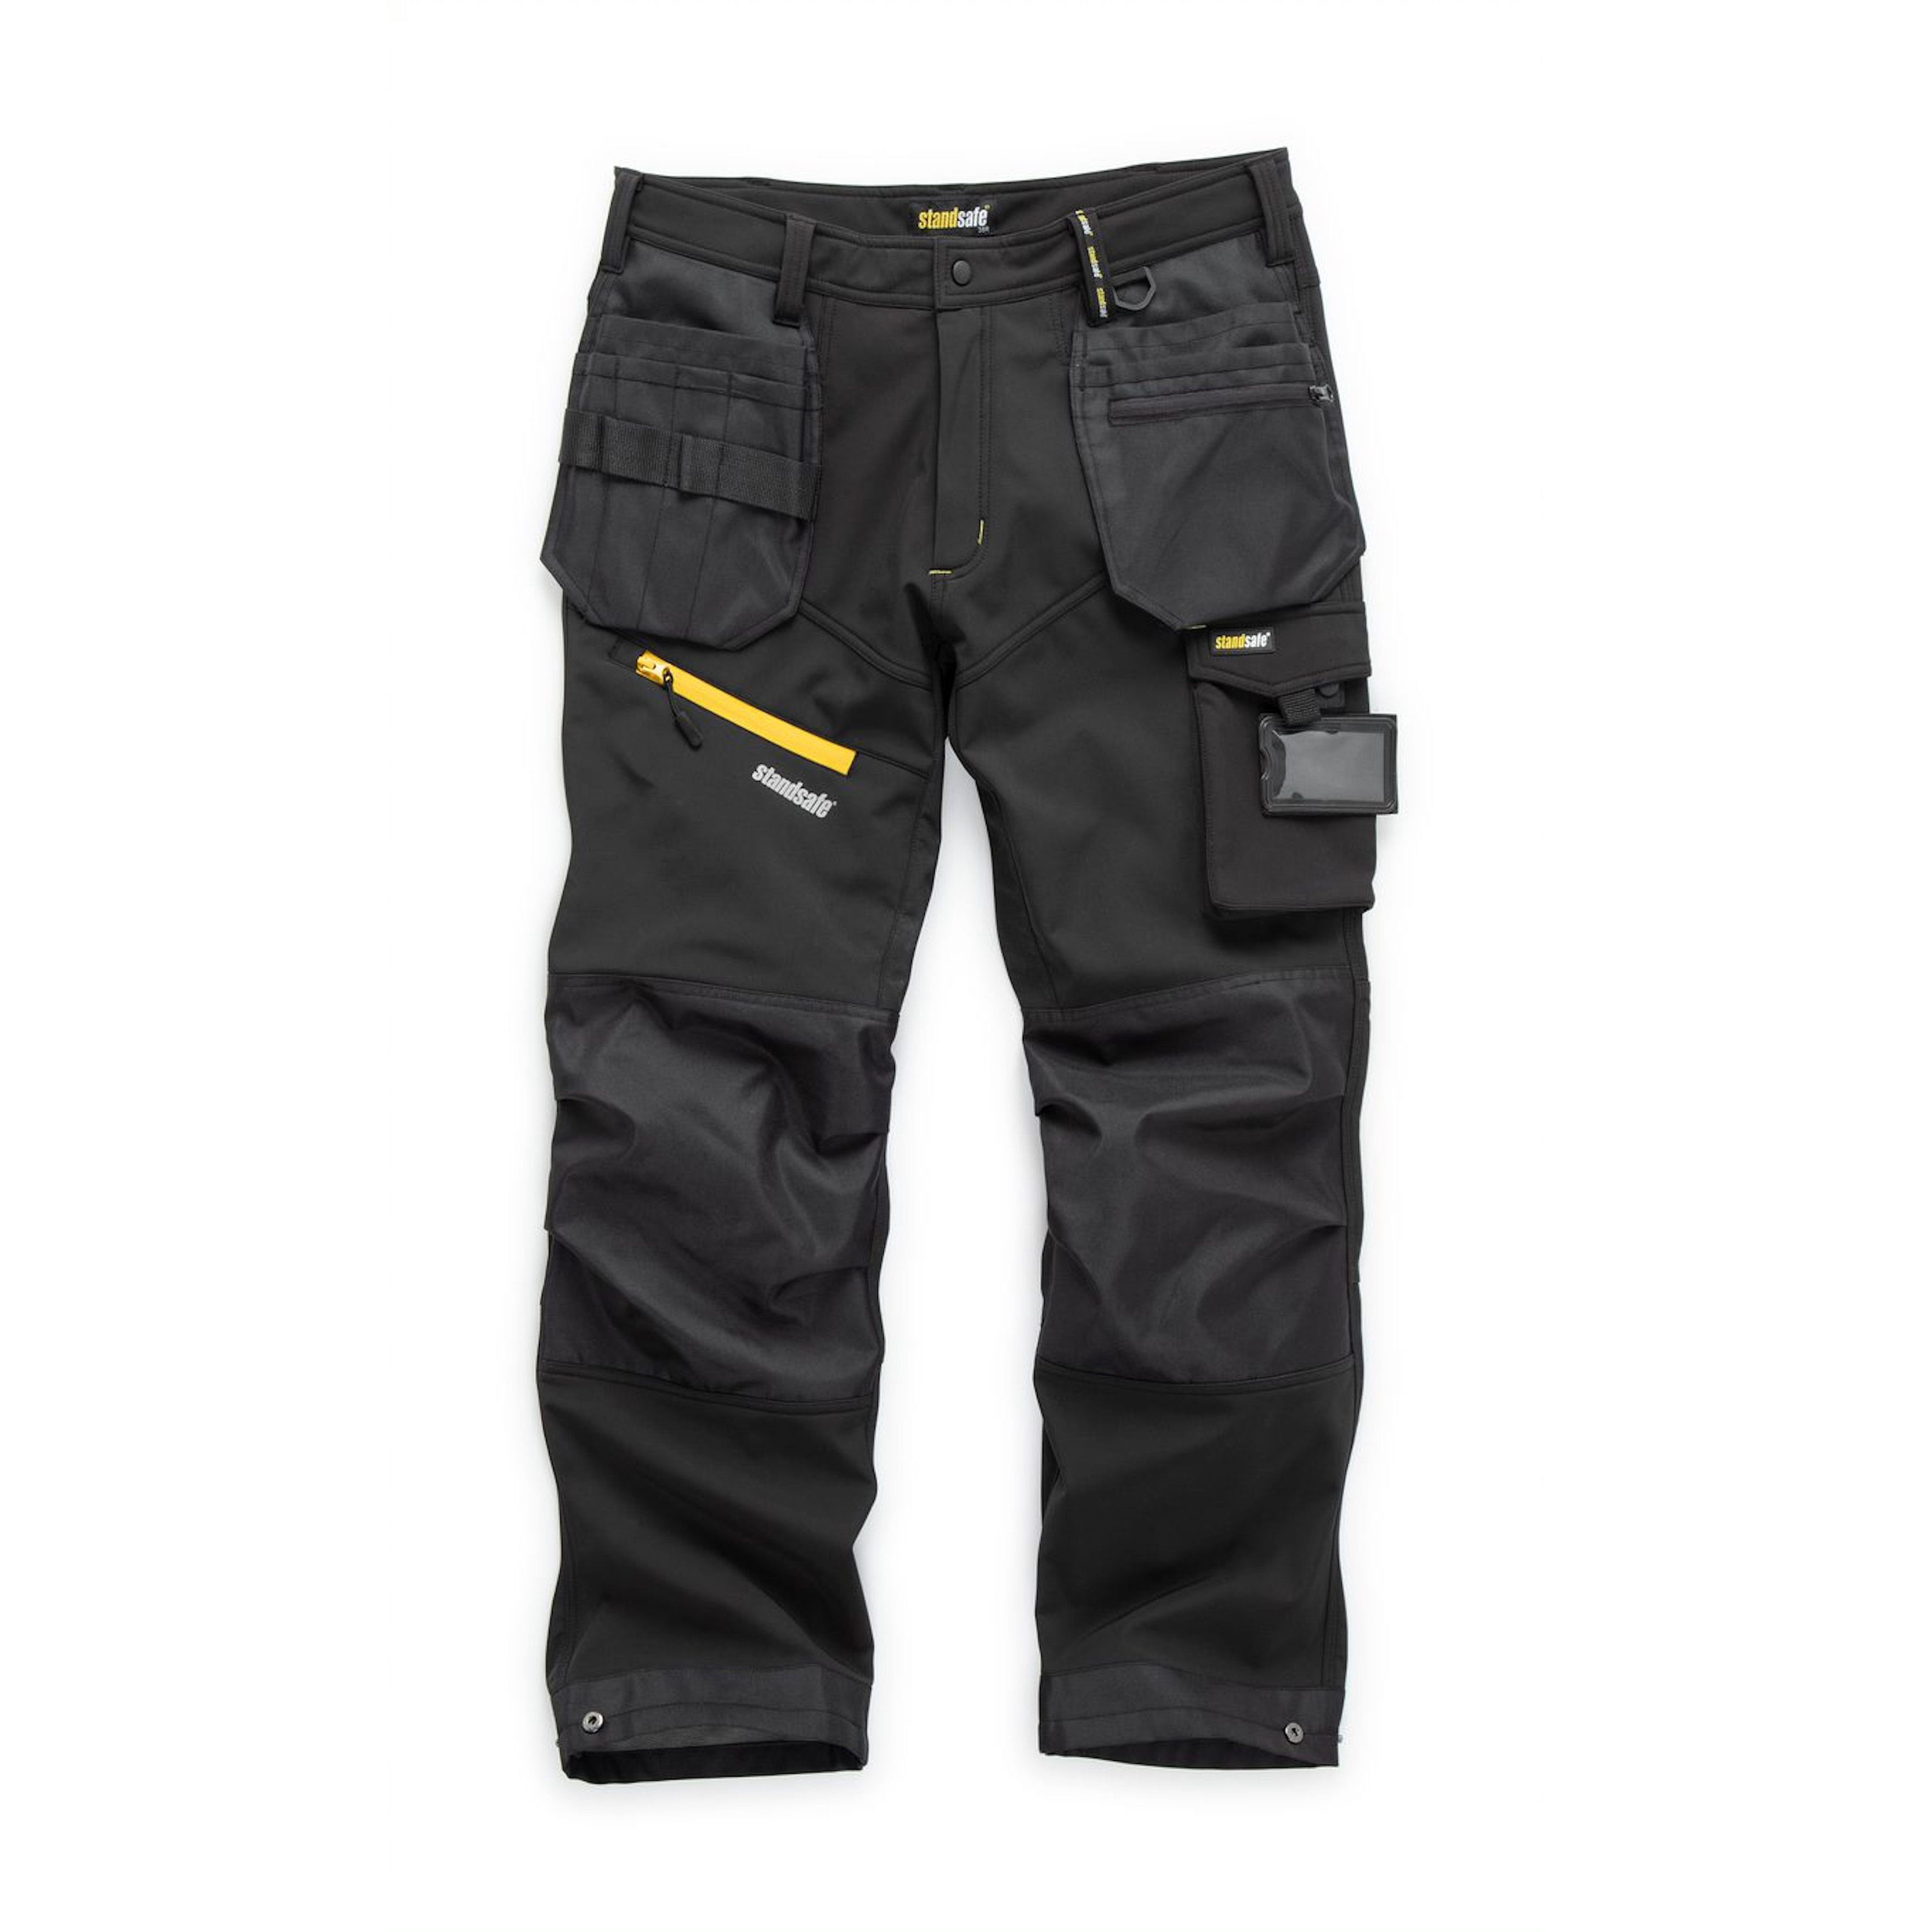 Standsafe XTreme Softshell Work Trousers - Black